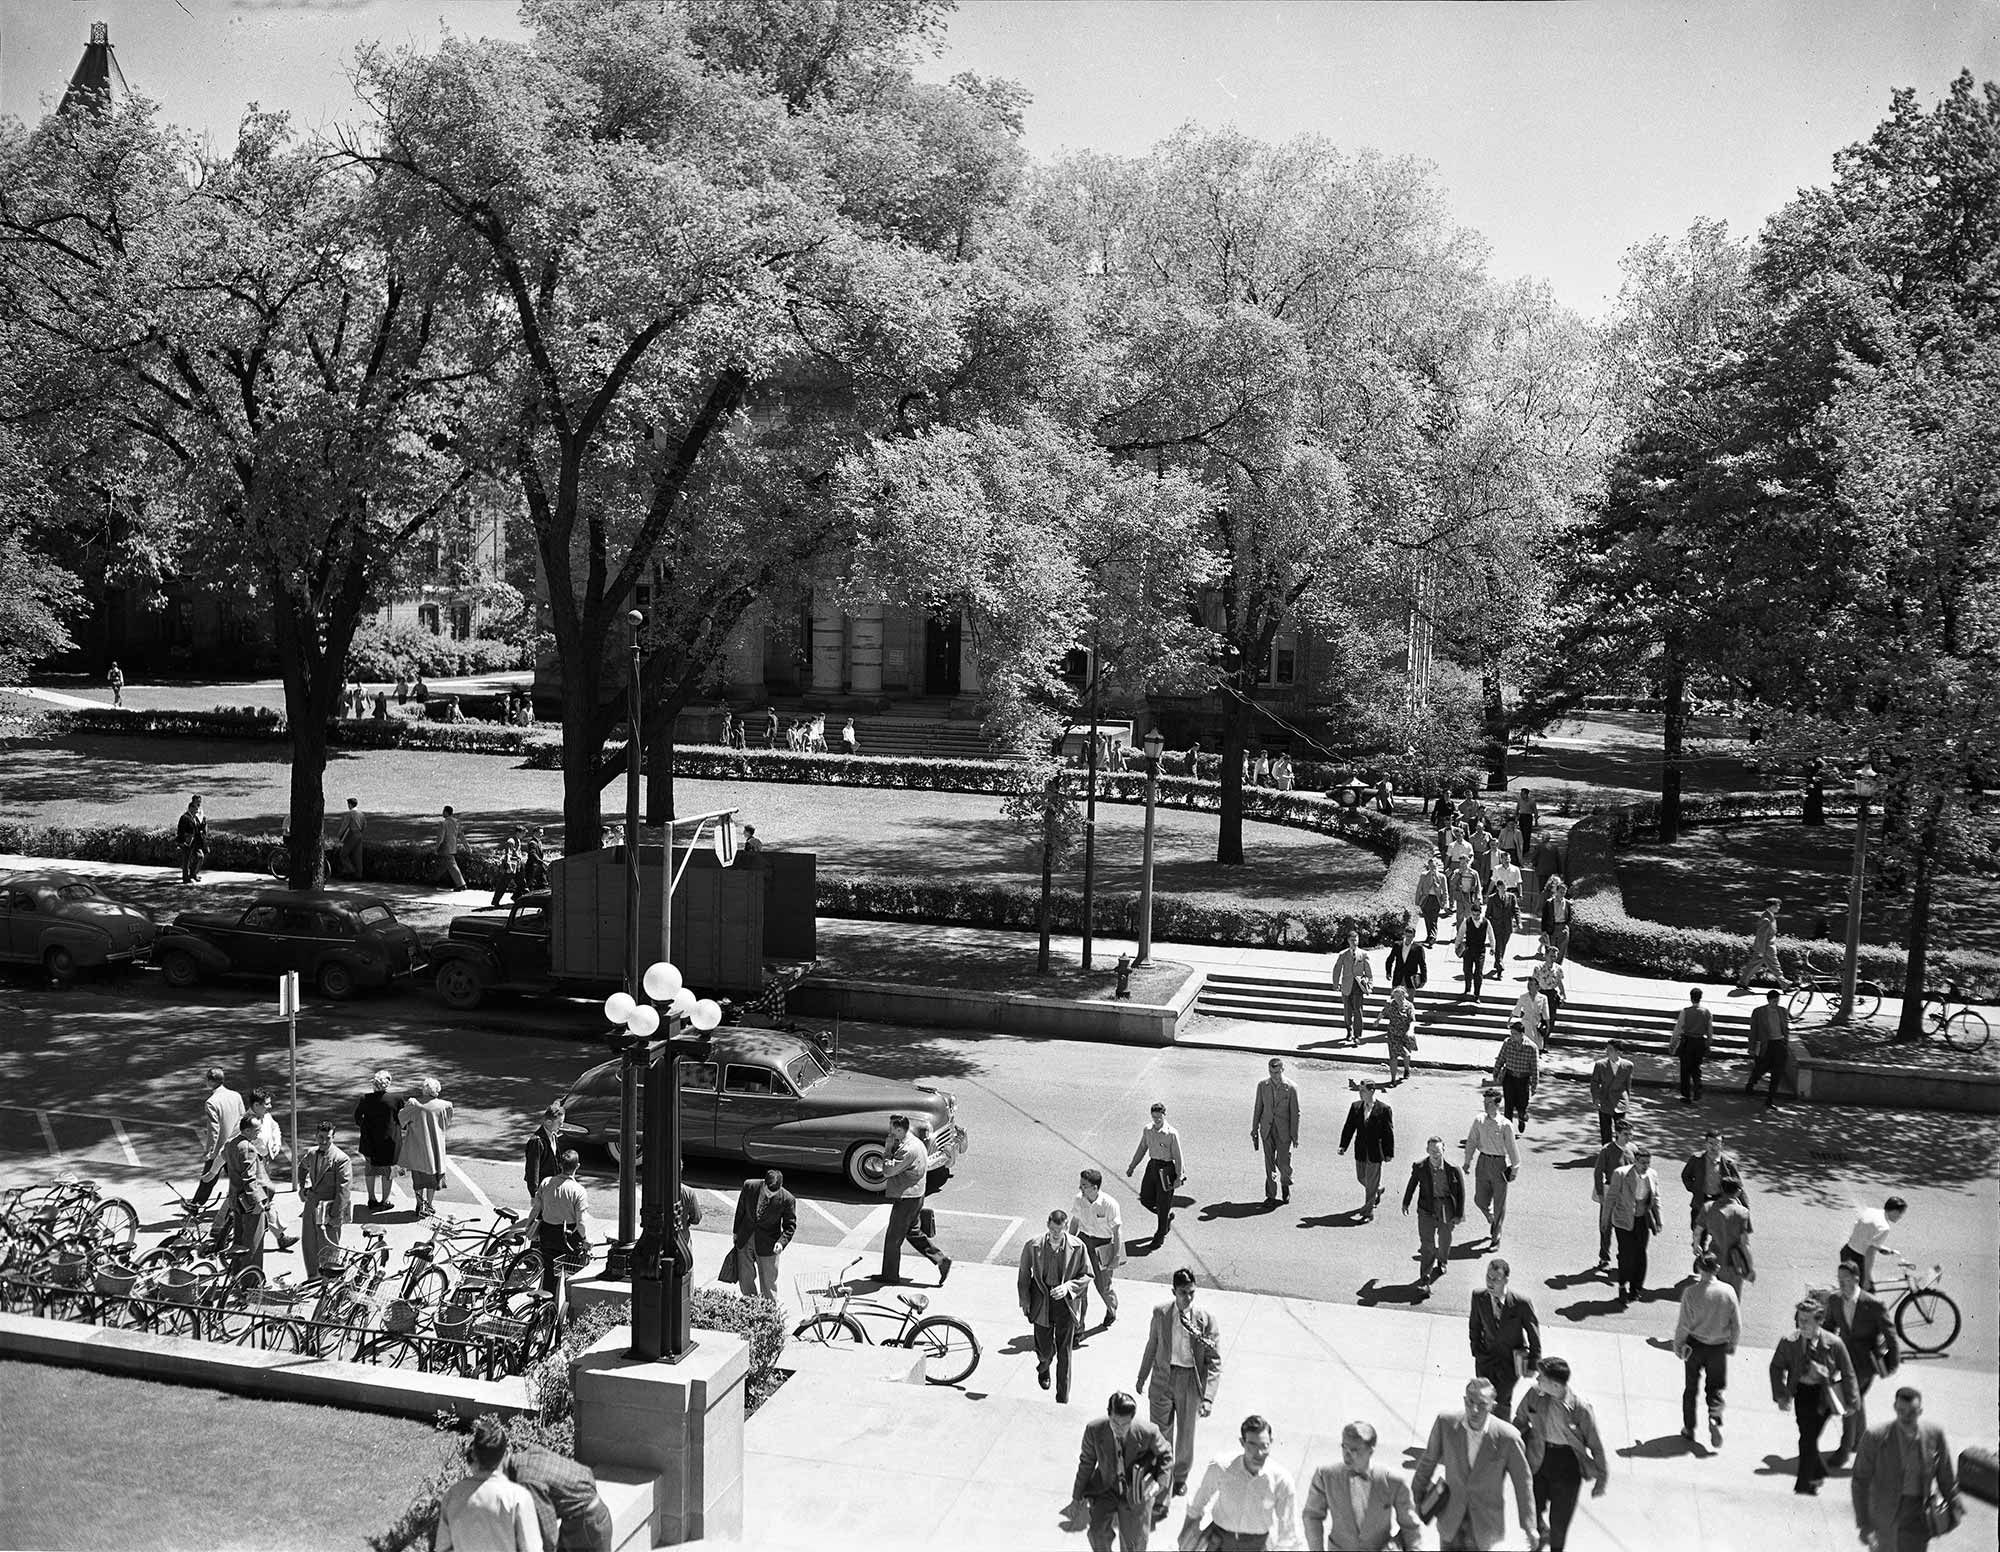 Students crossing State Street in front of the Michigan Union on the Ann Arbor campus, 1947